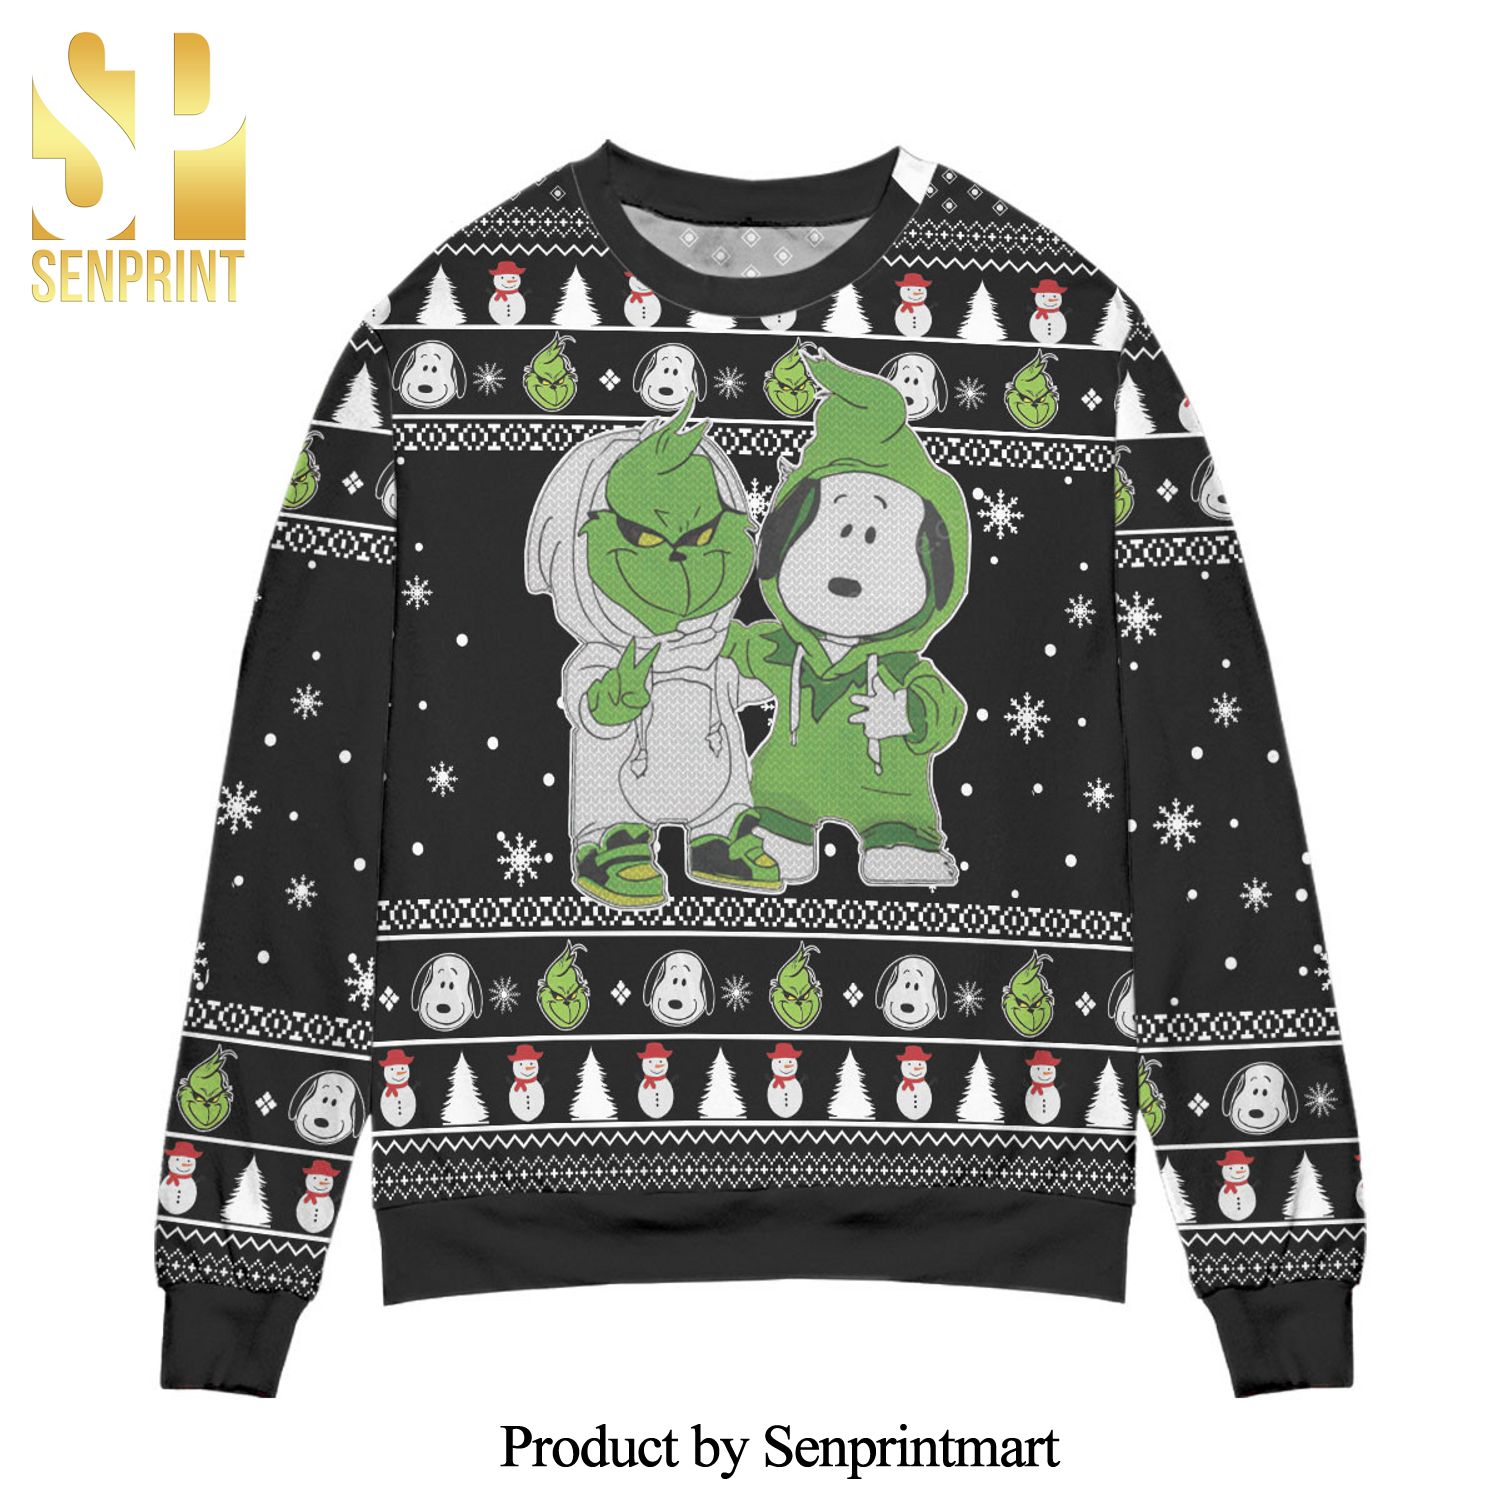 The Grinch And Snoopy Knitted Ugly Christmas Sweater – Black